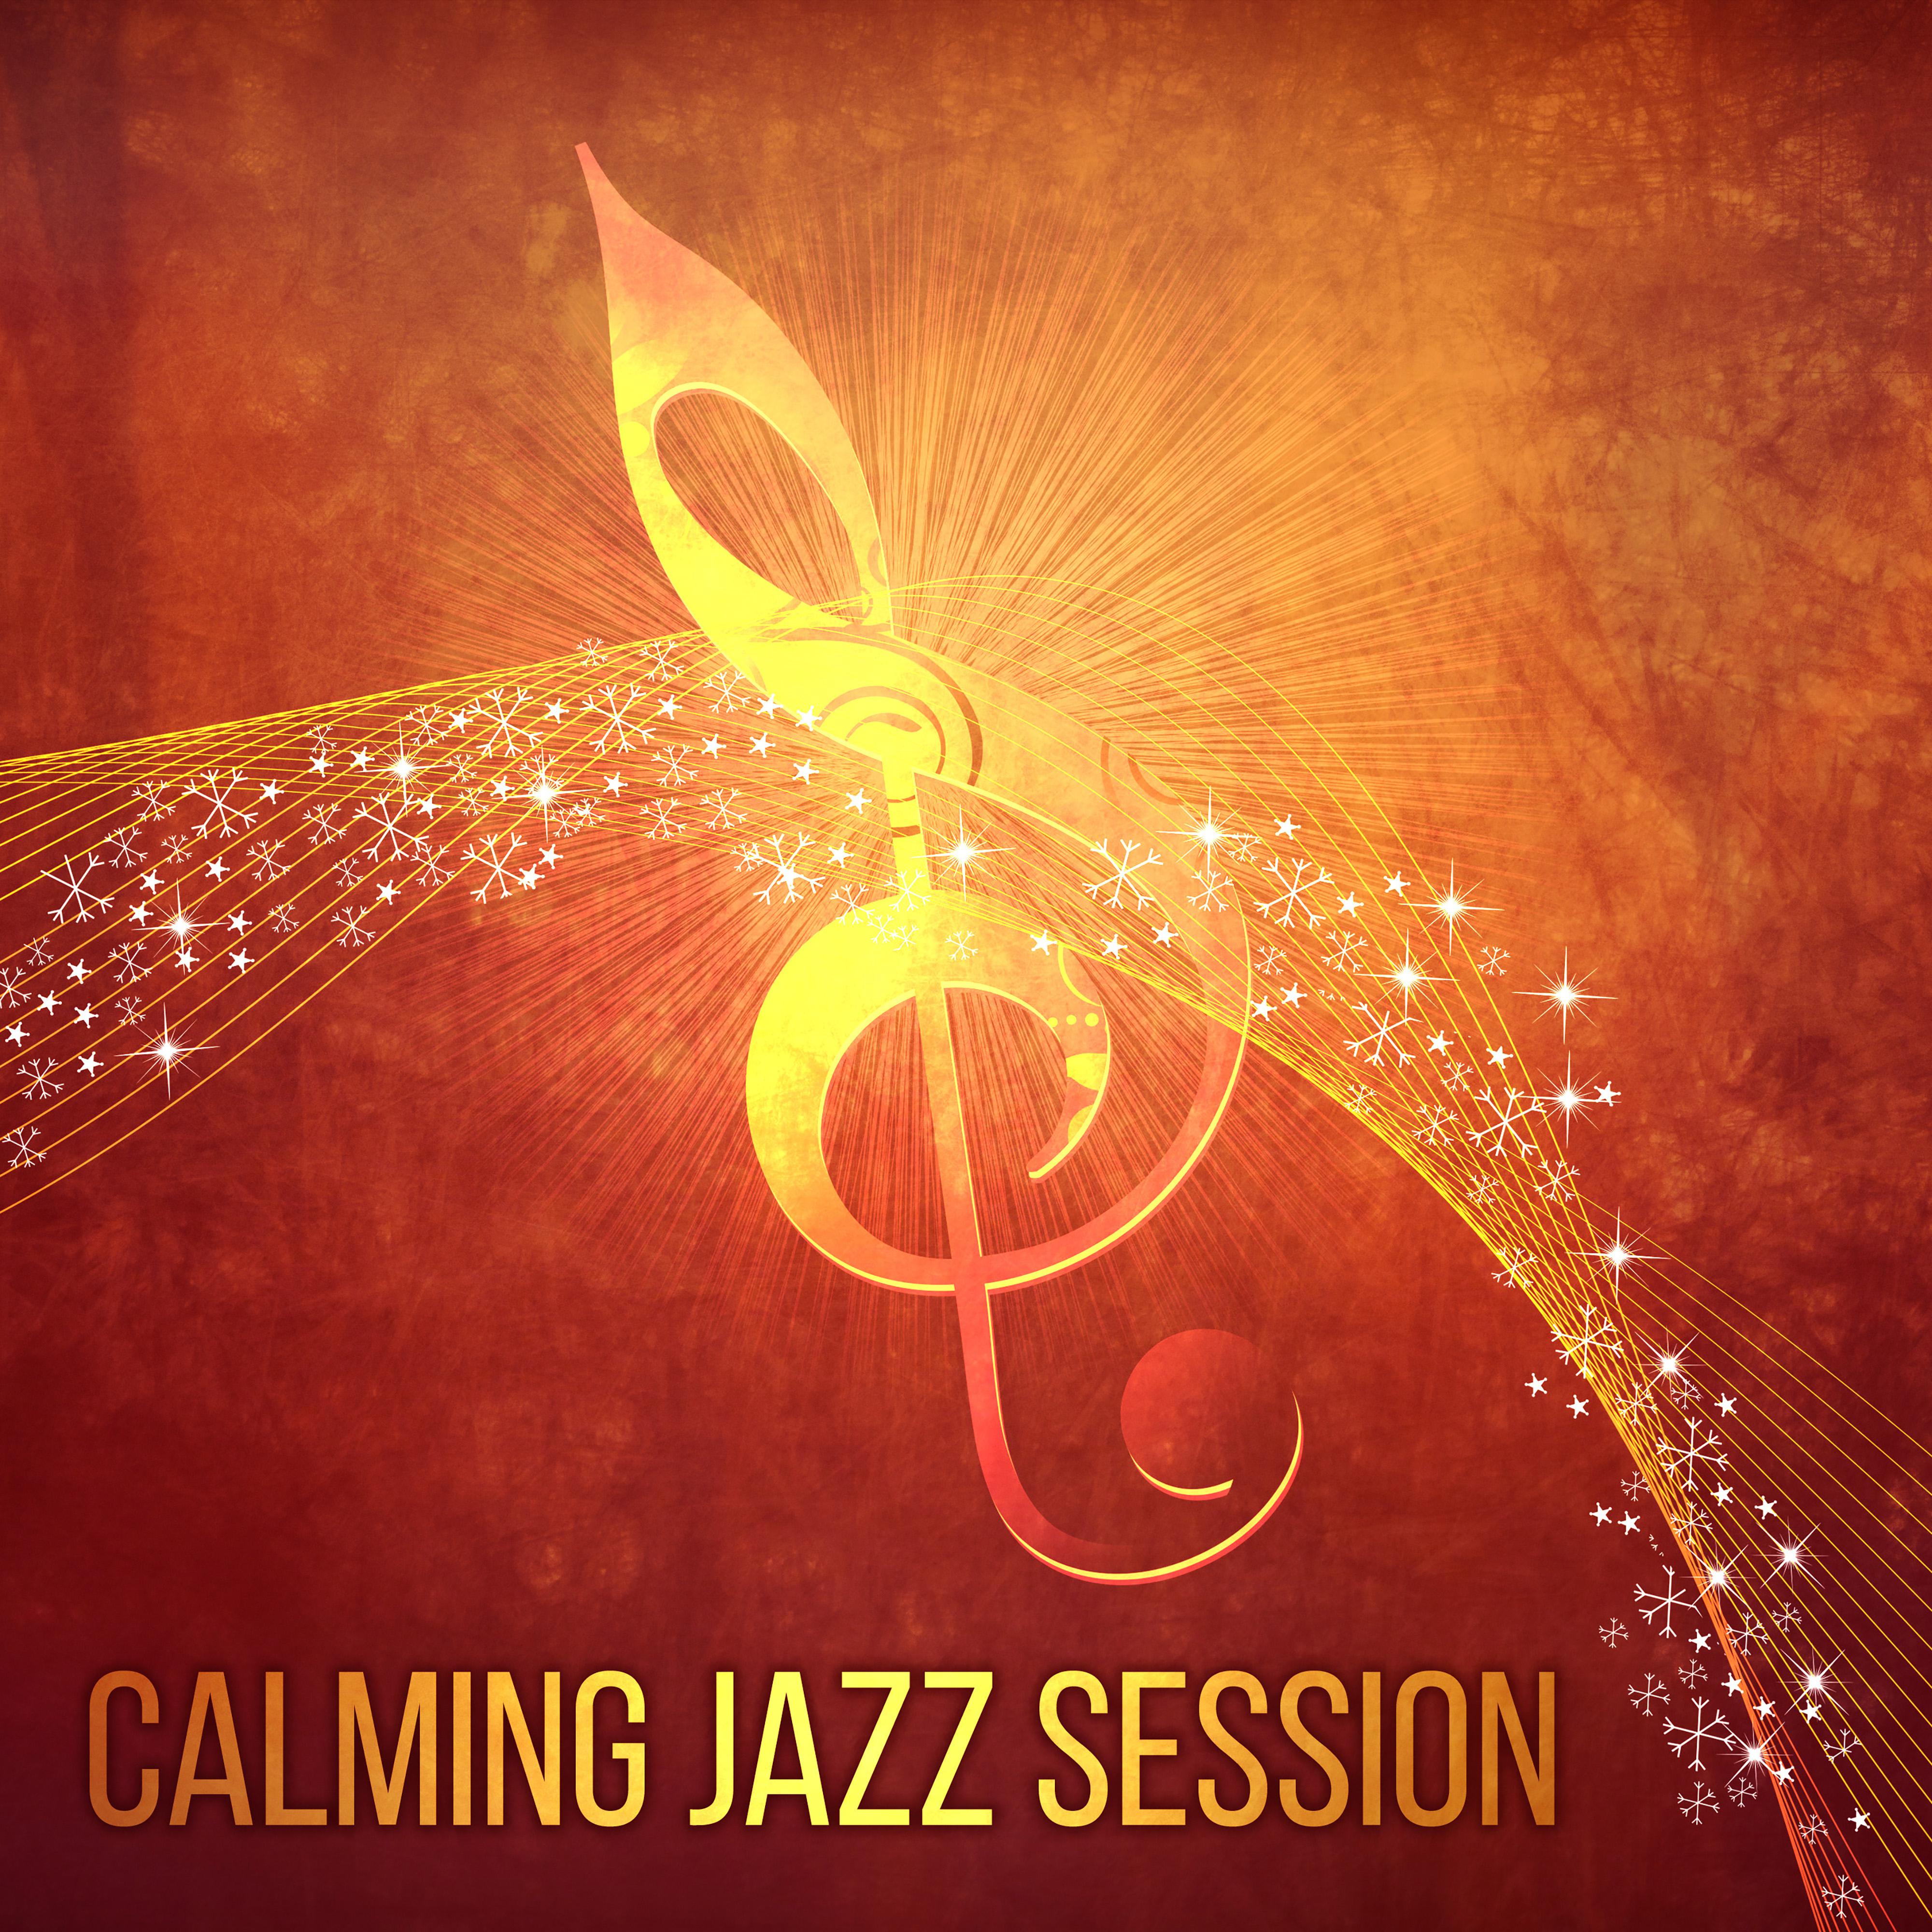 Calming Jazz Session – Instrumental Music for Relax, Mellow Jazz Sounds, Music for Restaurant, Serenity Tracks